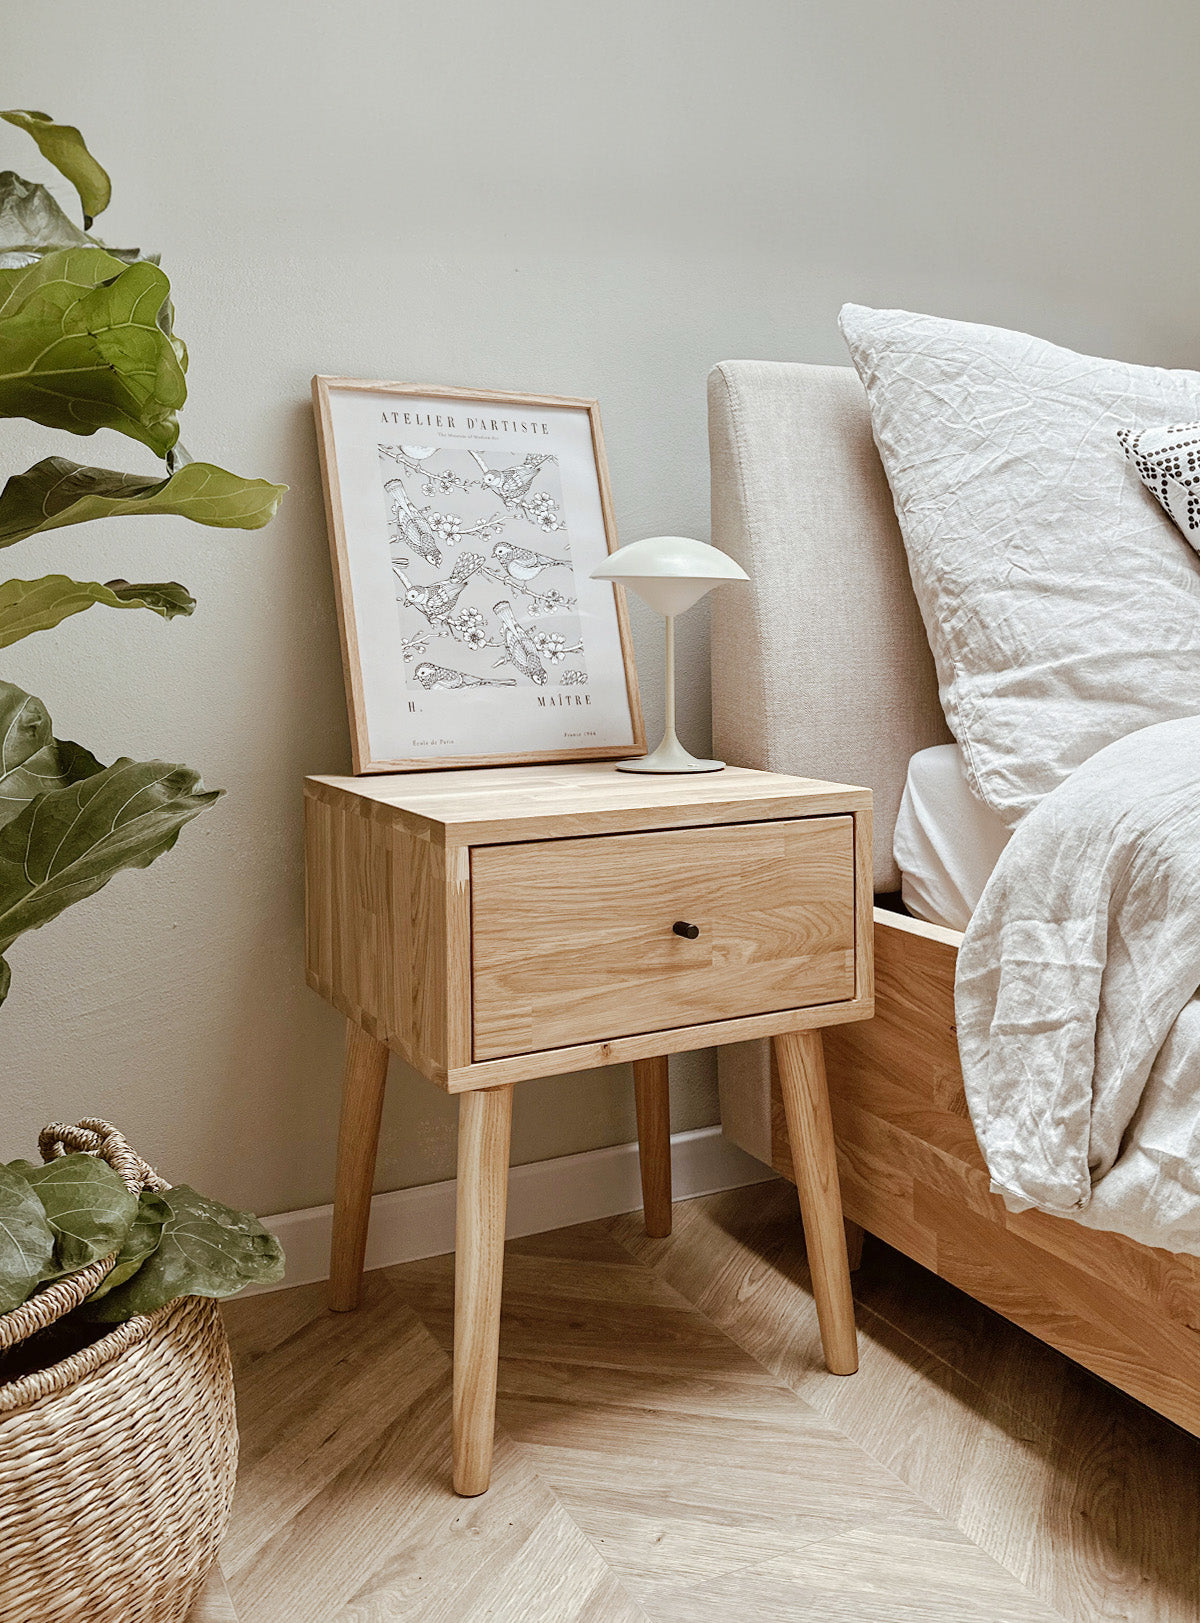 Bedside table - how to choose a bedside table?